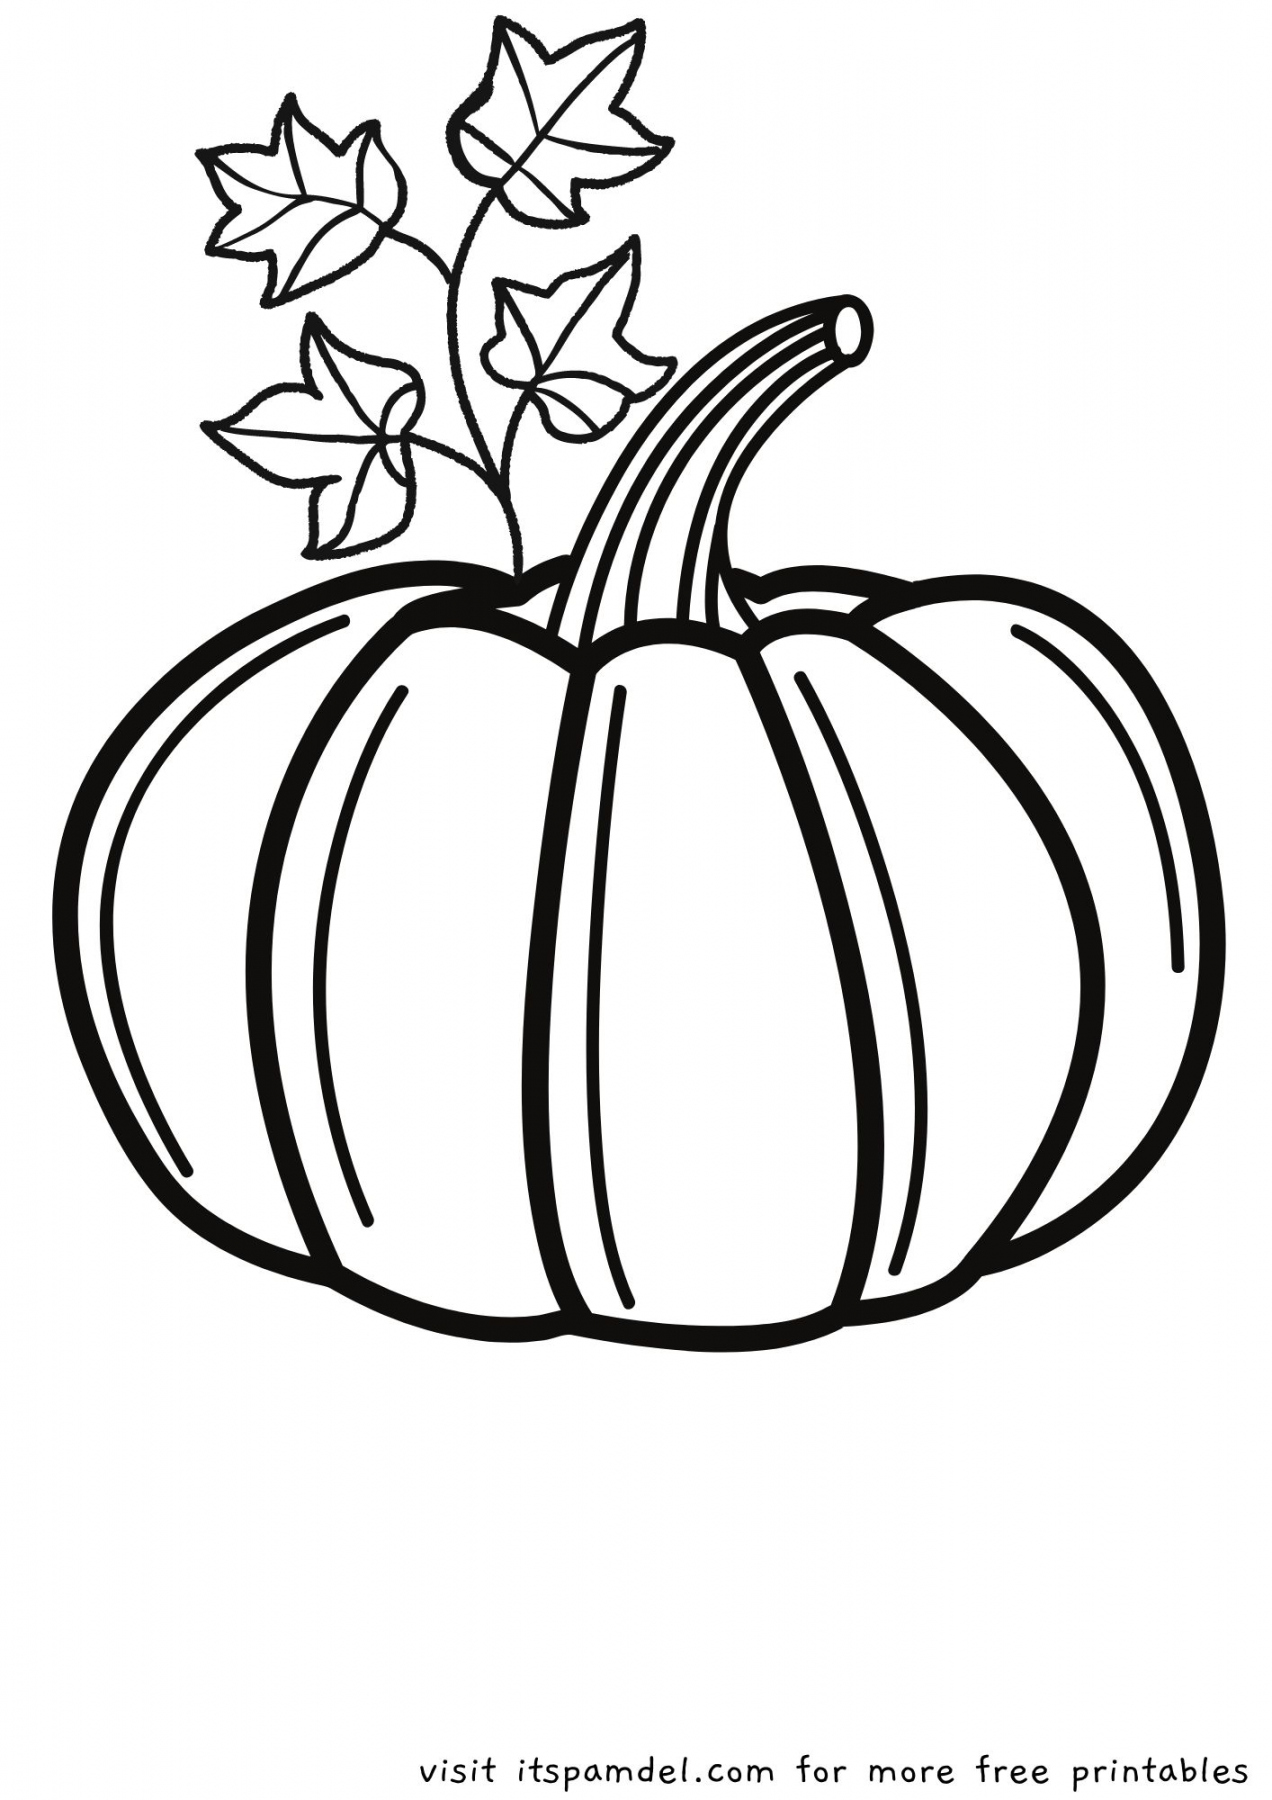 Free Fall Coloring Pages Printable - Printable - Free Printable: Fall Coloring Pages for Kids  It